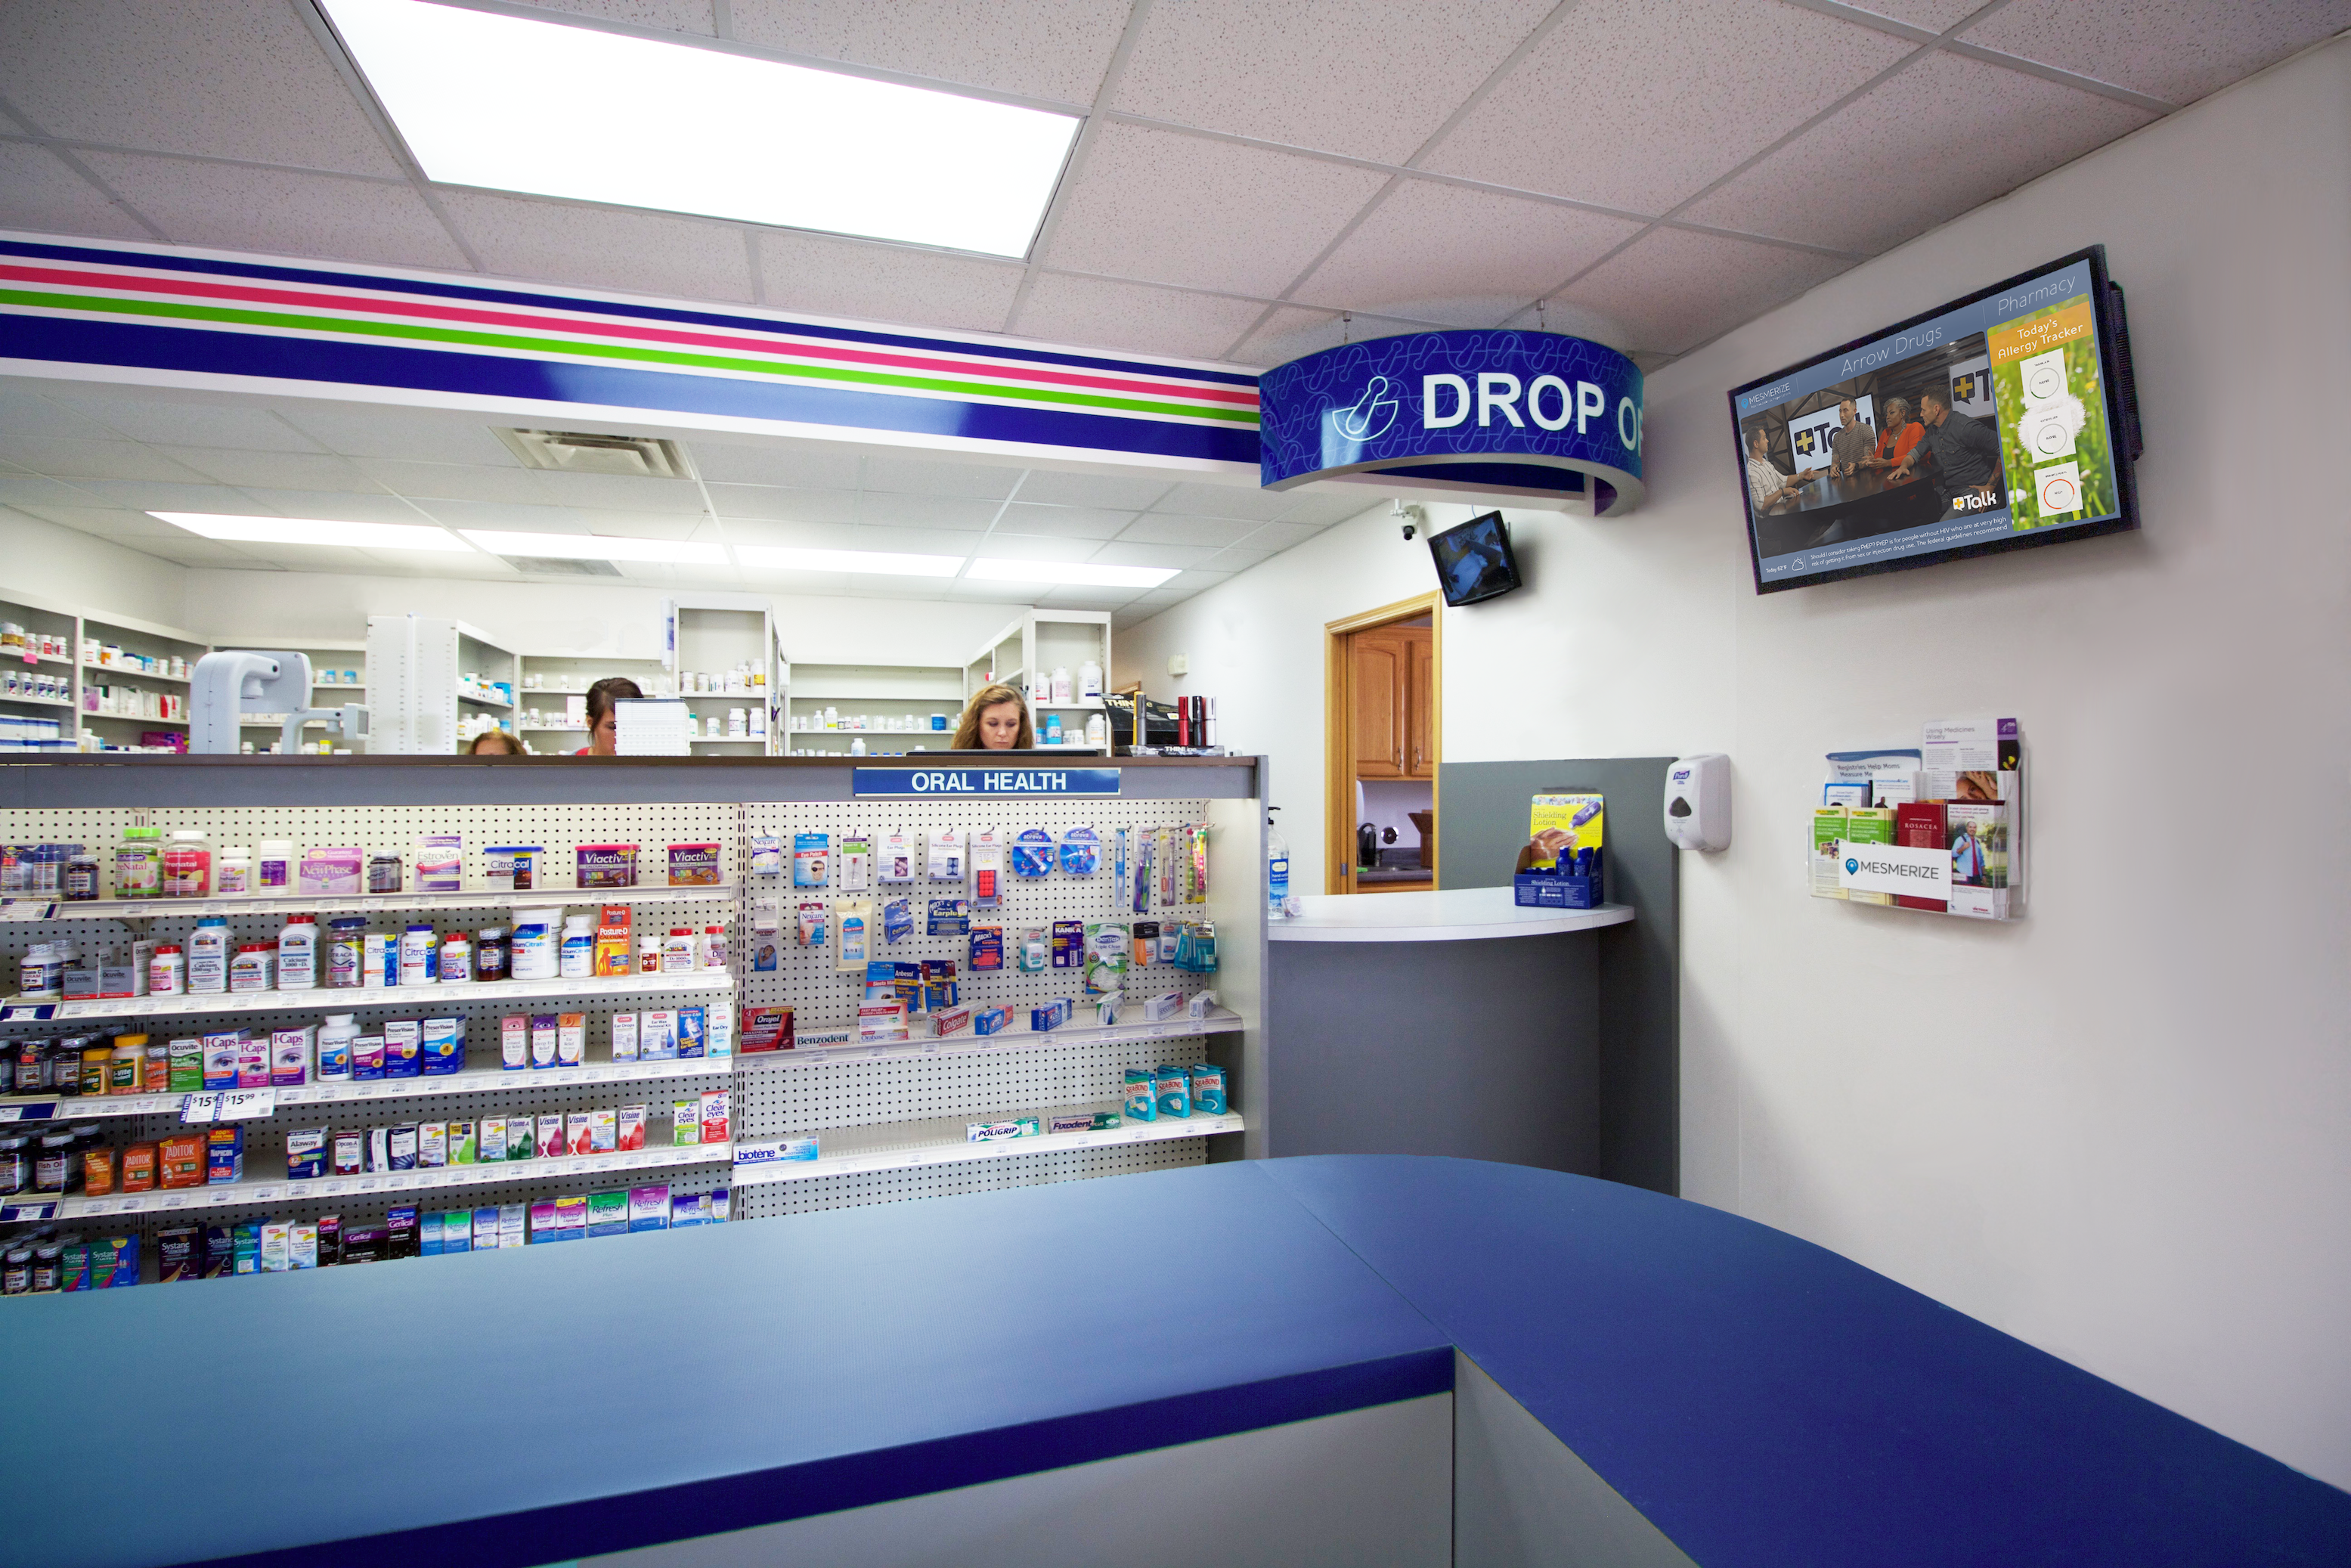 Digital screens in retail pharmacies facilitate conversations between patients and pharmacists.